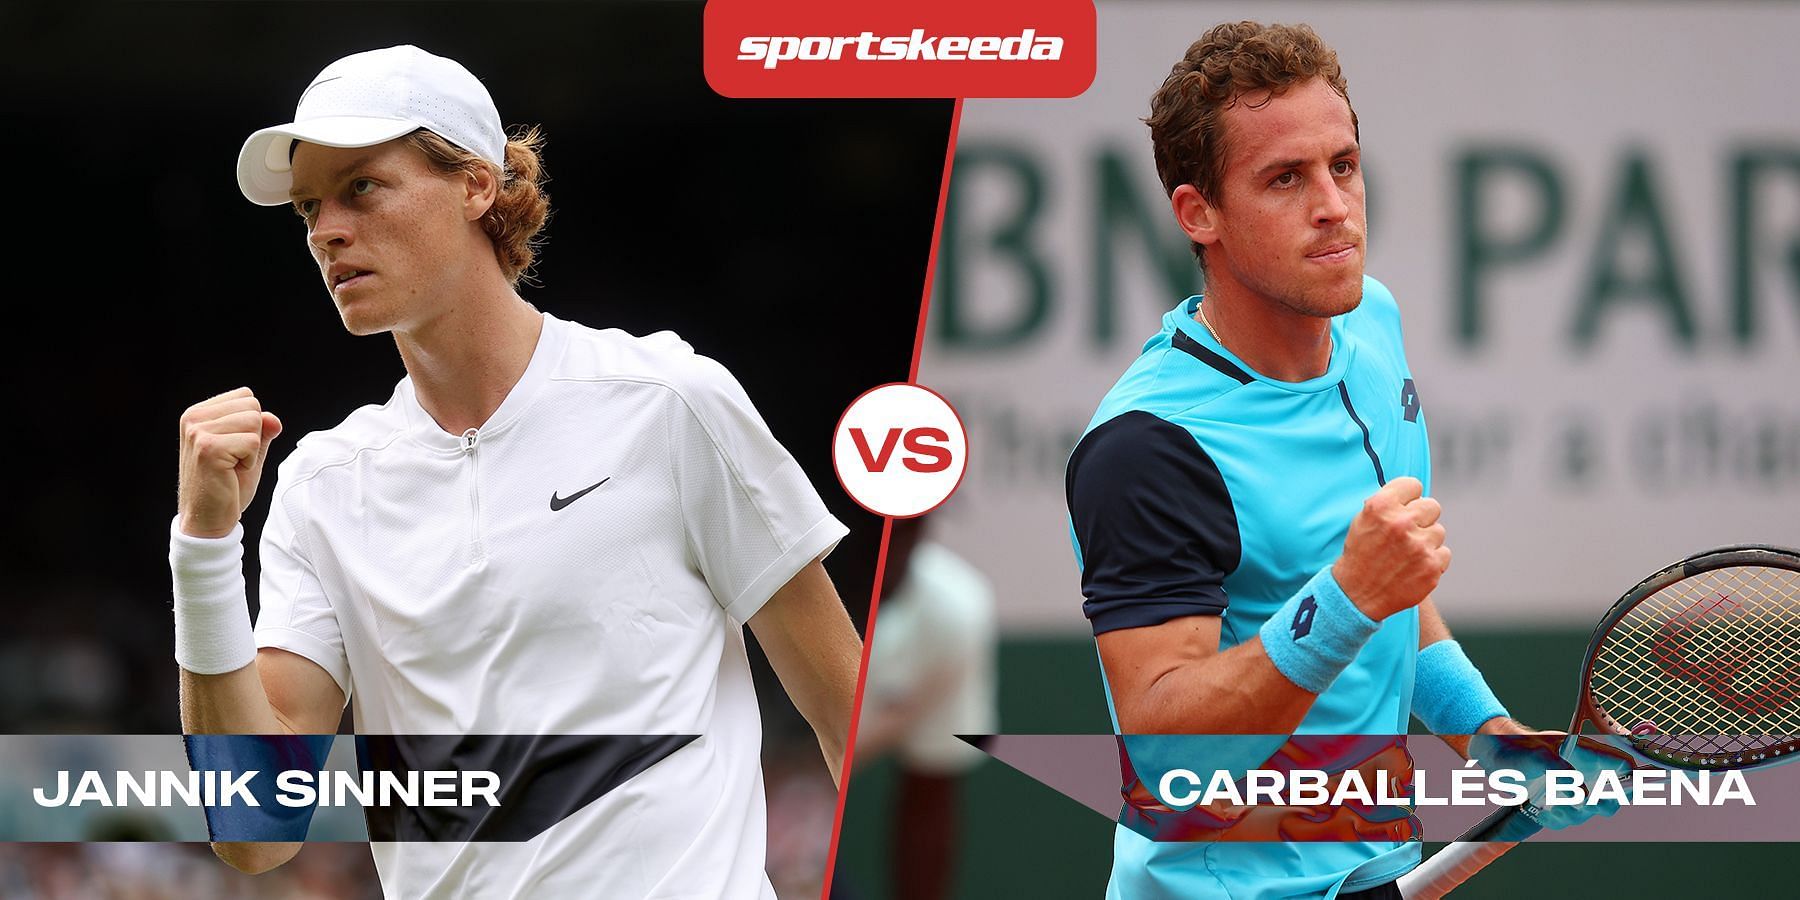 Sinner (L) will face off against Carballes Baena for the second time this year